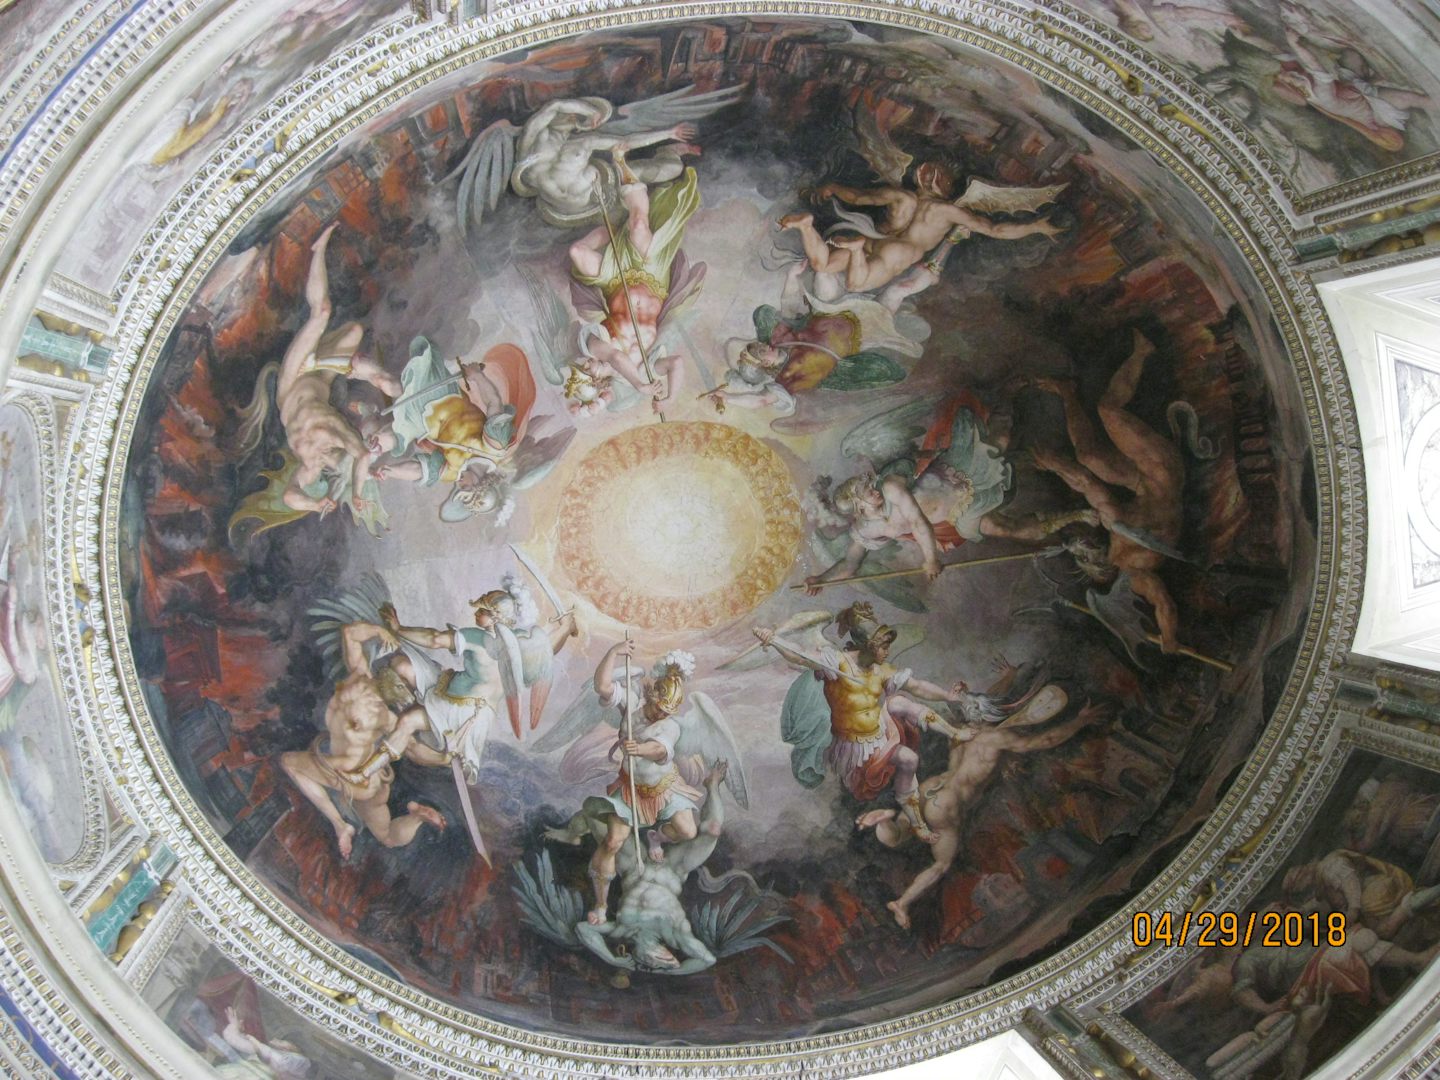 Inside of a dome in the Vatican